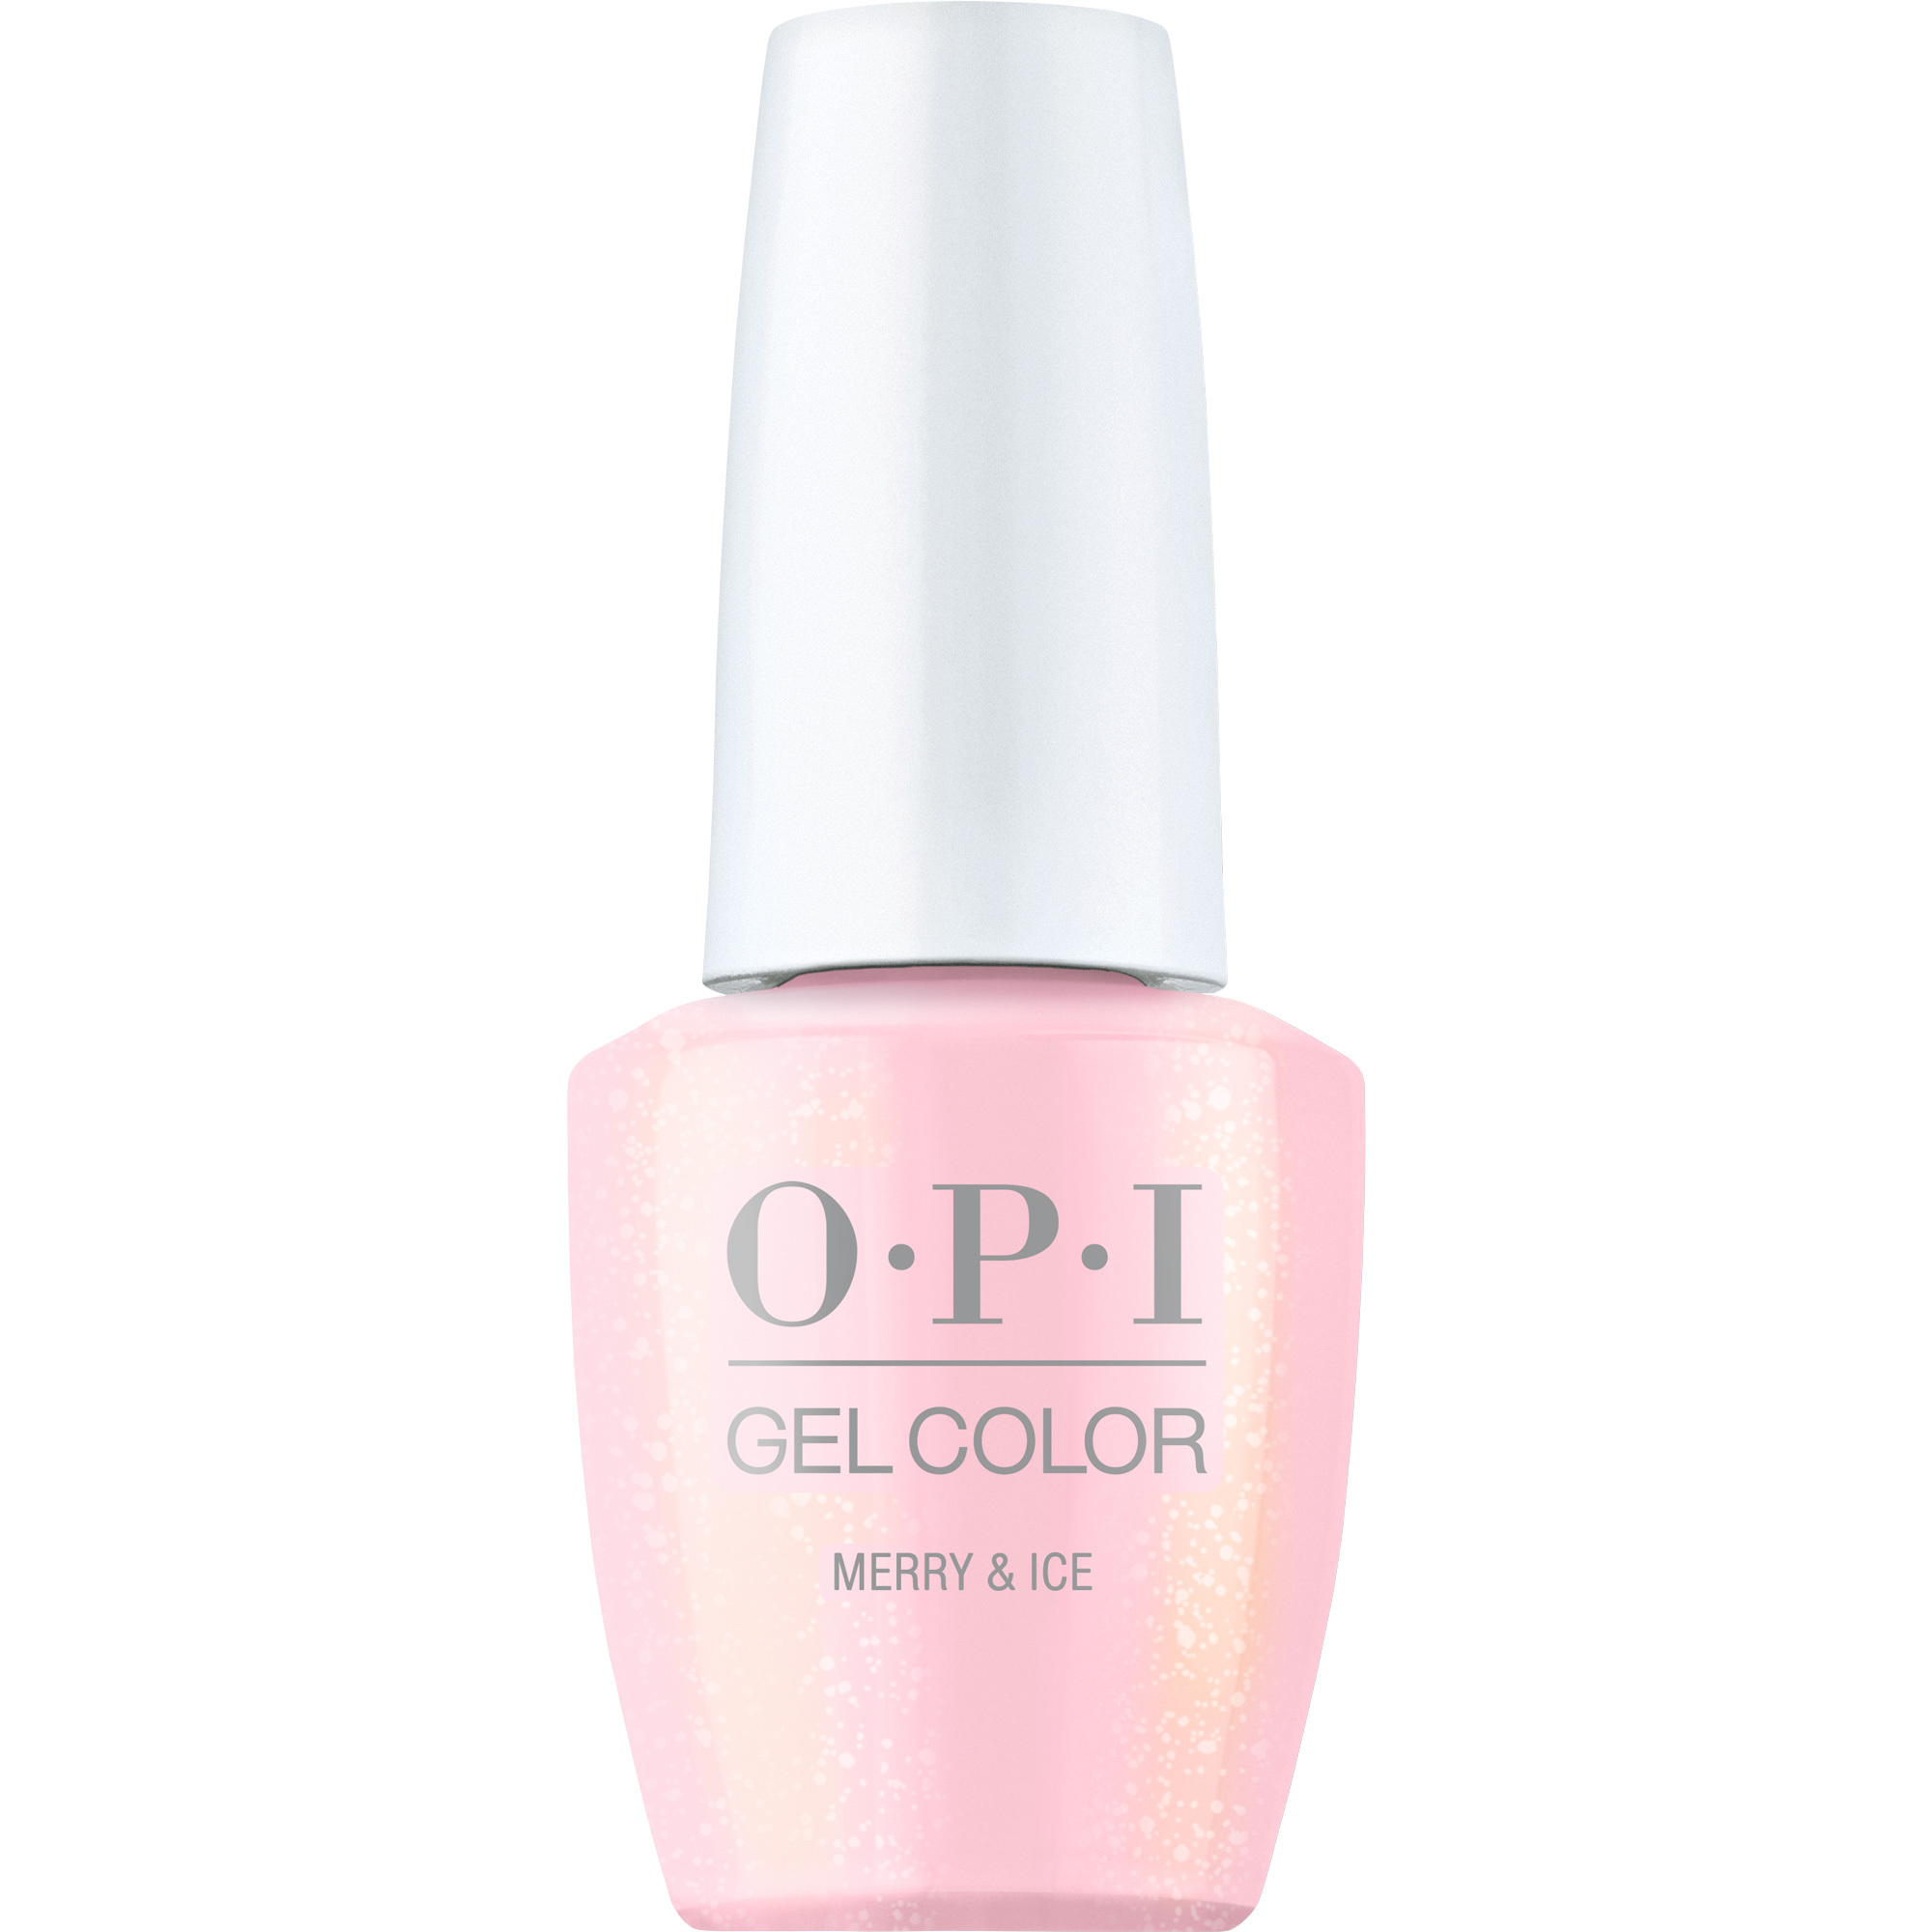 OPI Gel Color 360 - Merry & Ice